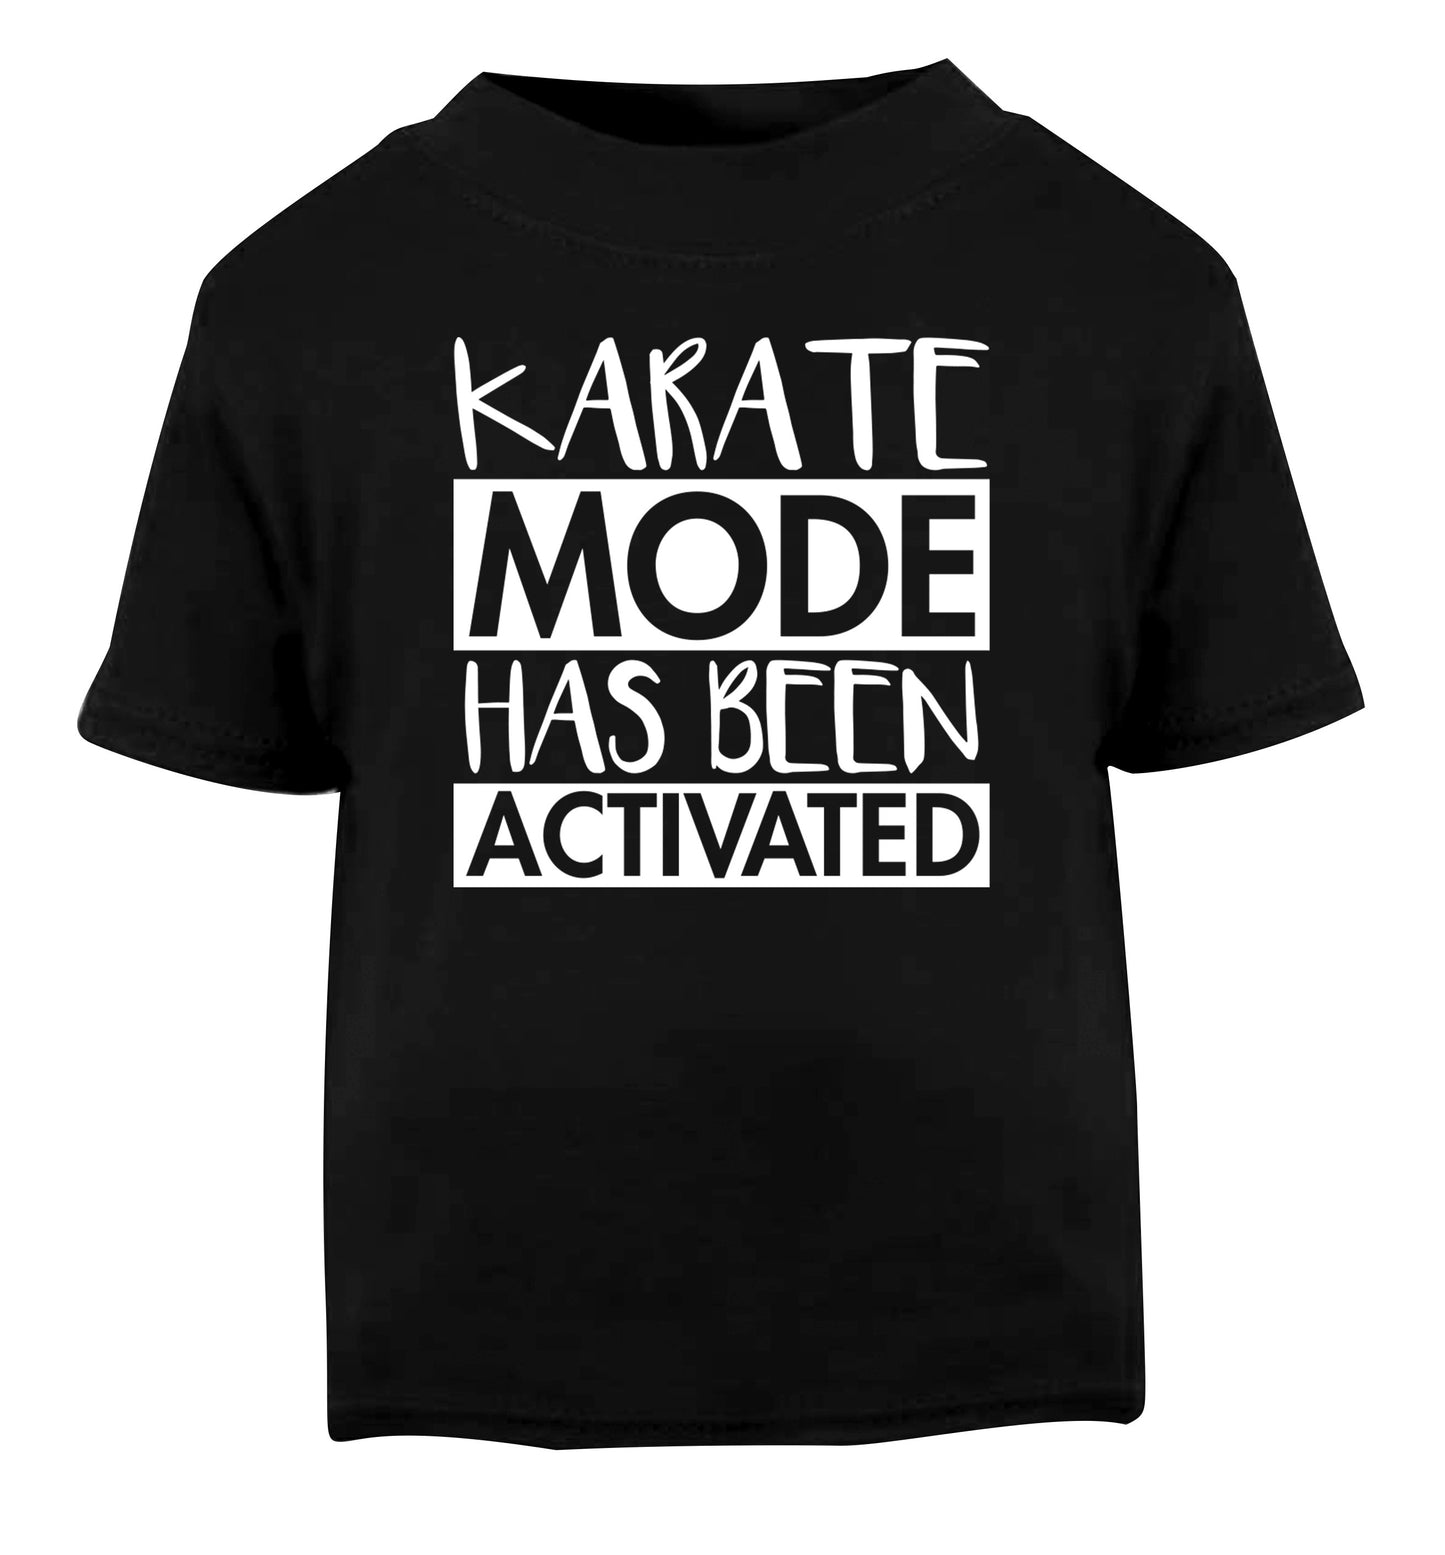 Karate mode activated Black Baby Toddler Tshirt 2 years